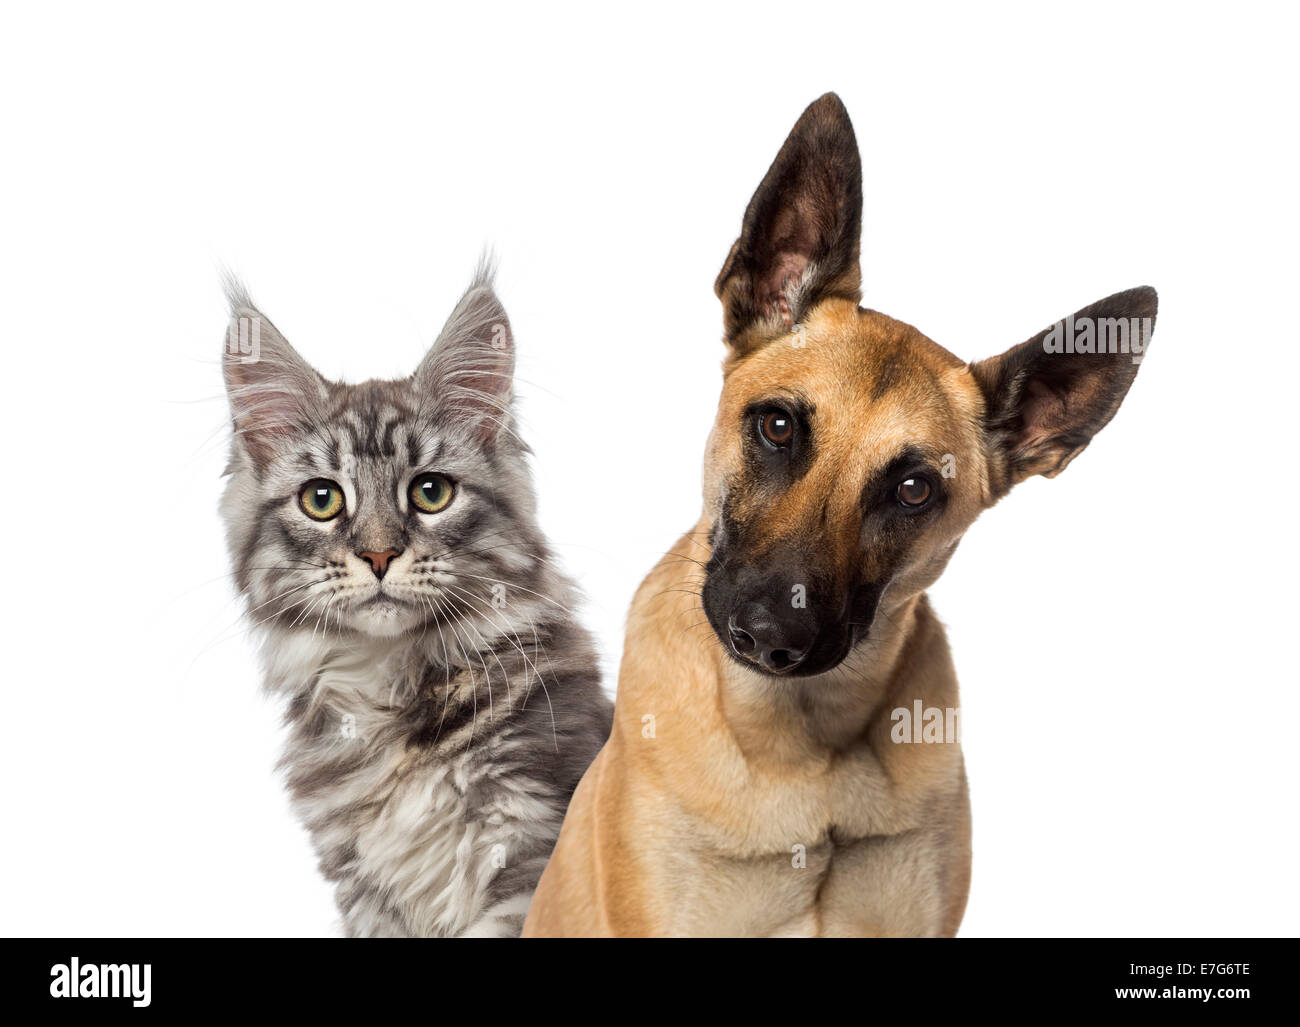 Close-up of a Belgian Shepherd Dog and a cat against white background Stock Photo